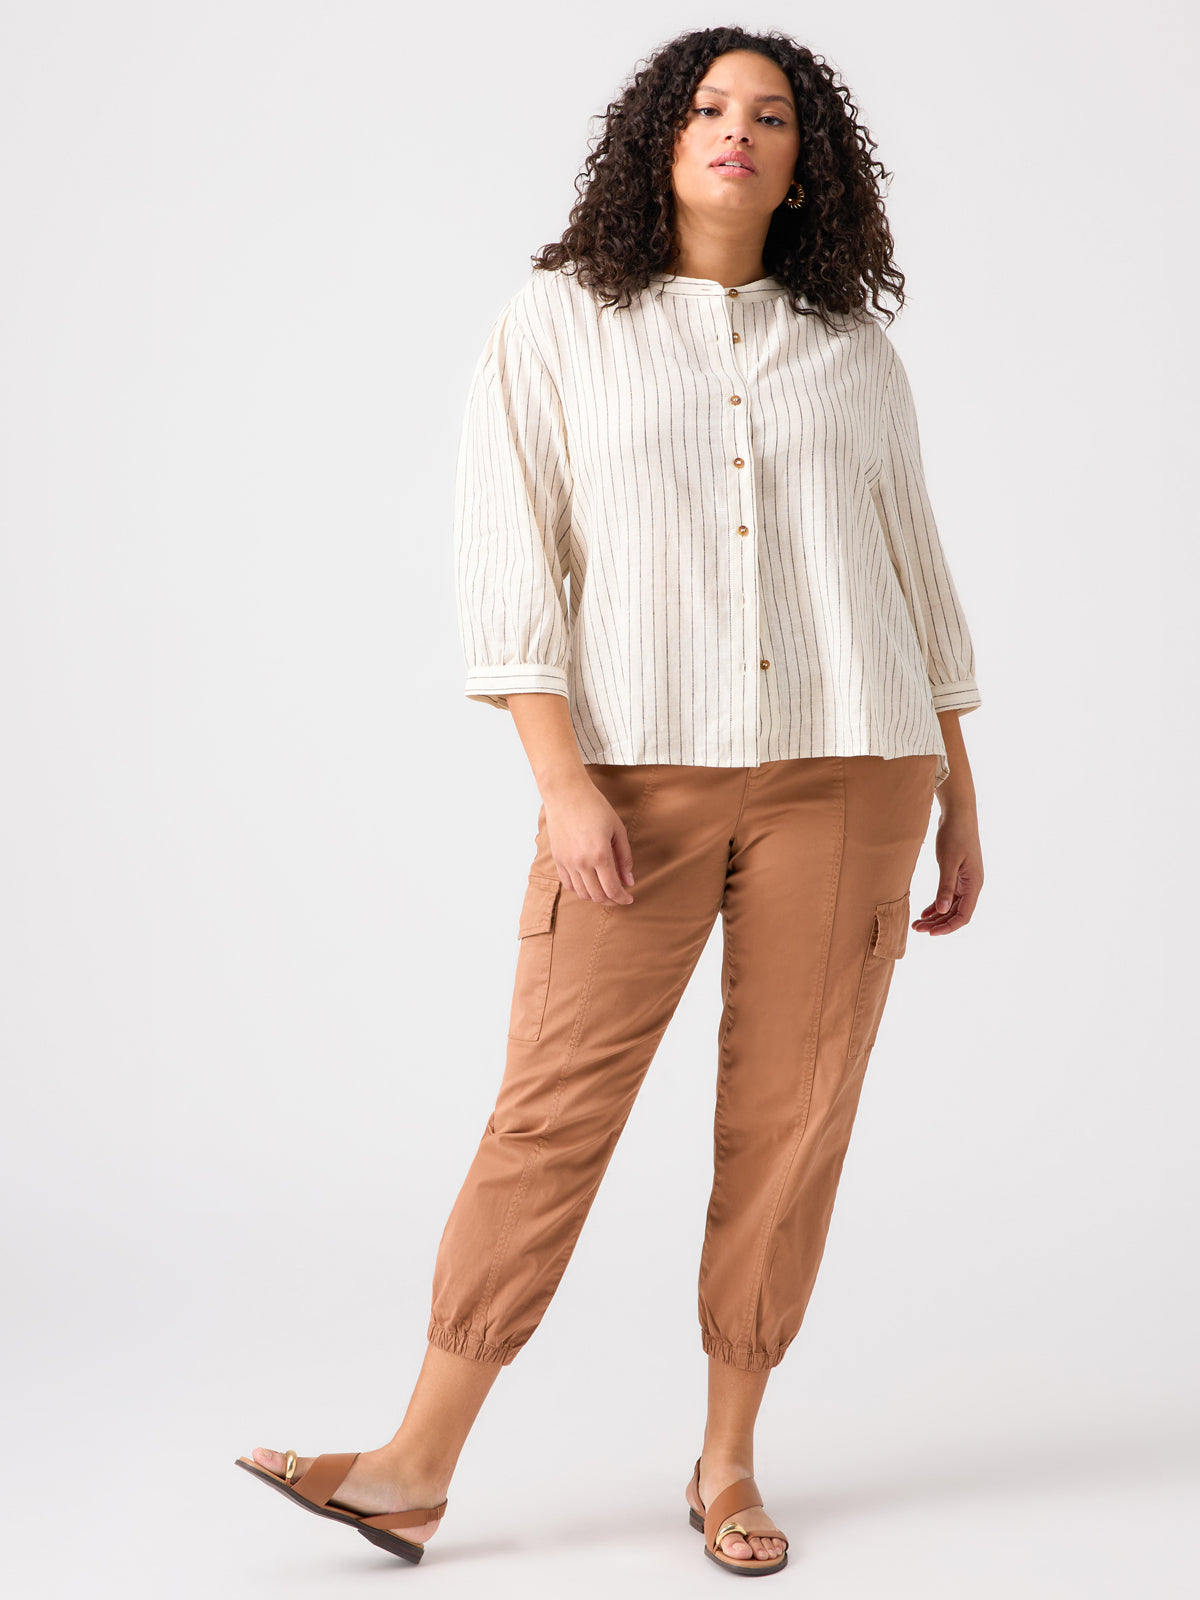 The Femme Shirt Birch Stripe Inclusive Collection